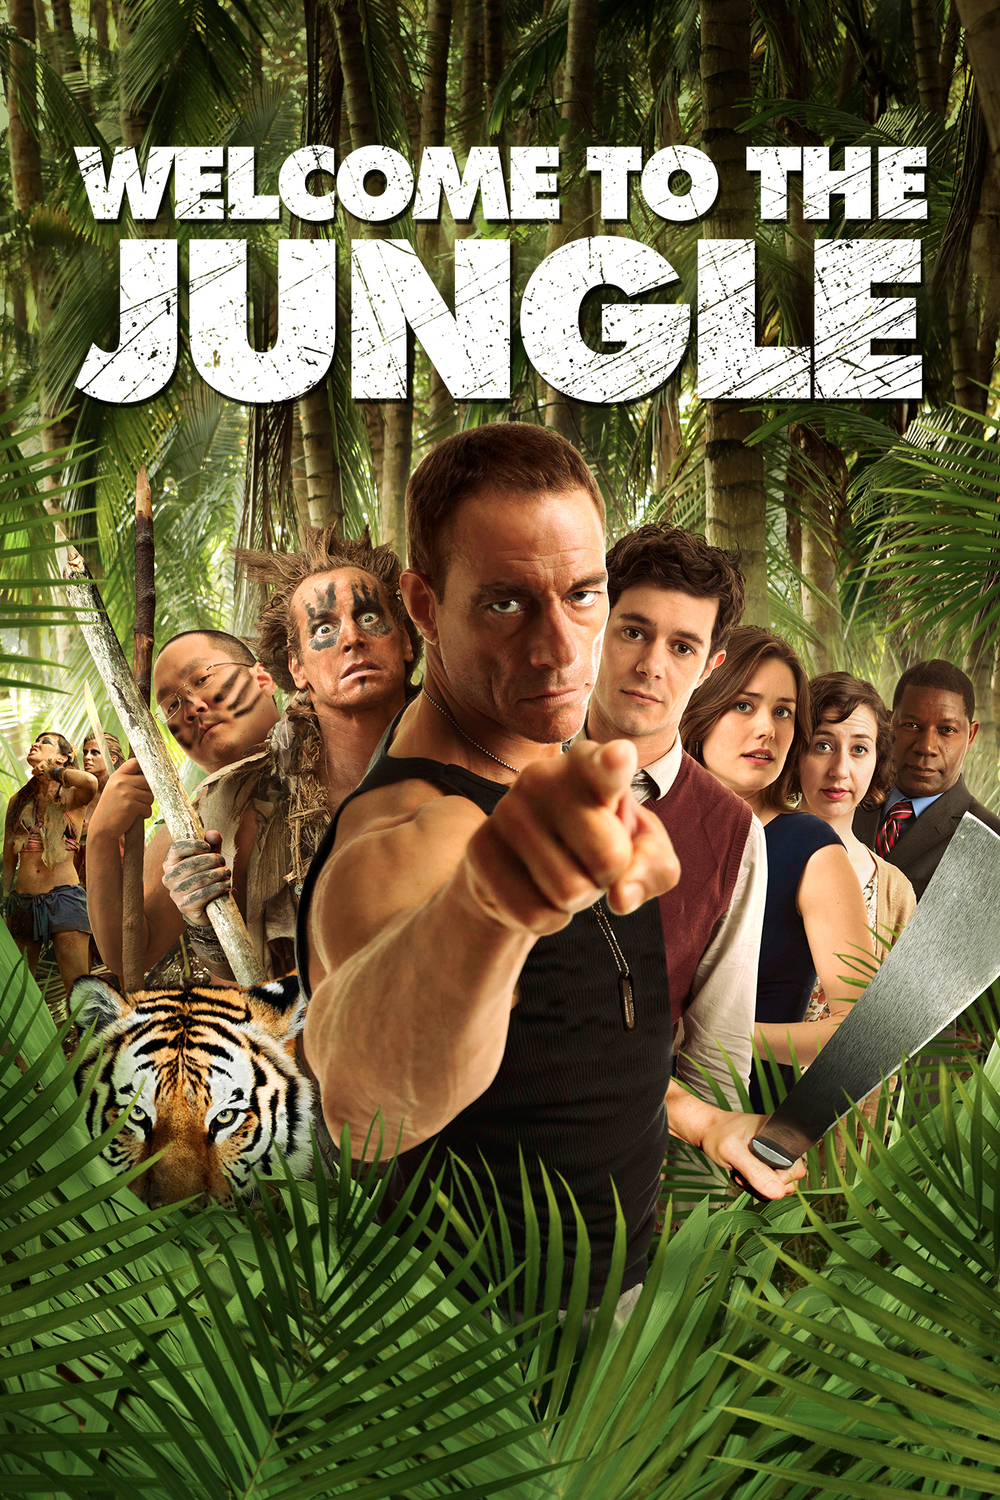 Welcome to the Jungle 2013 BluRay 720p 5.1CH Welcome to the Jungle (2013) LIMITED BluRay 720p 5.1CH